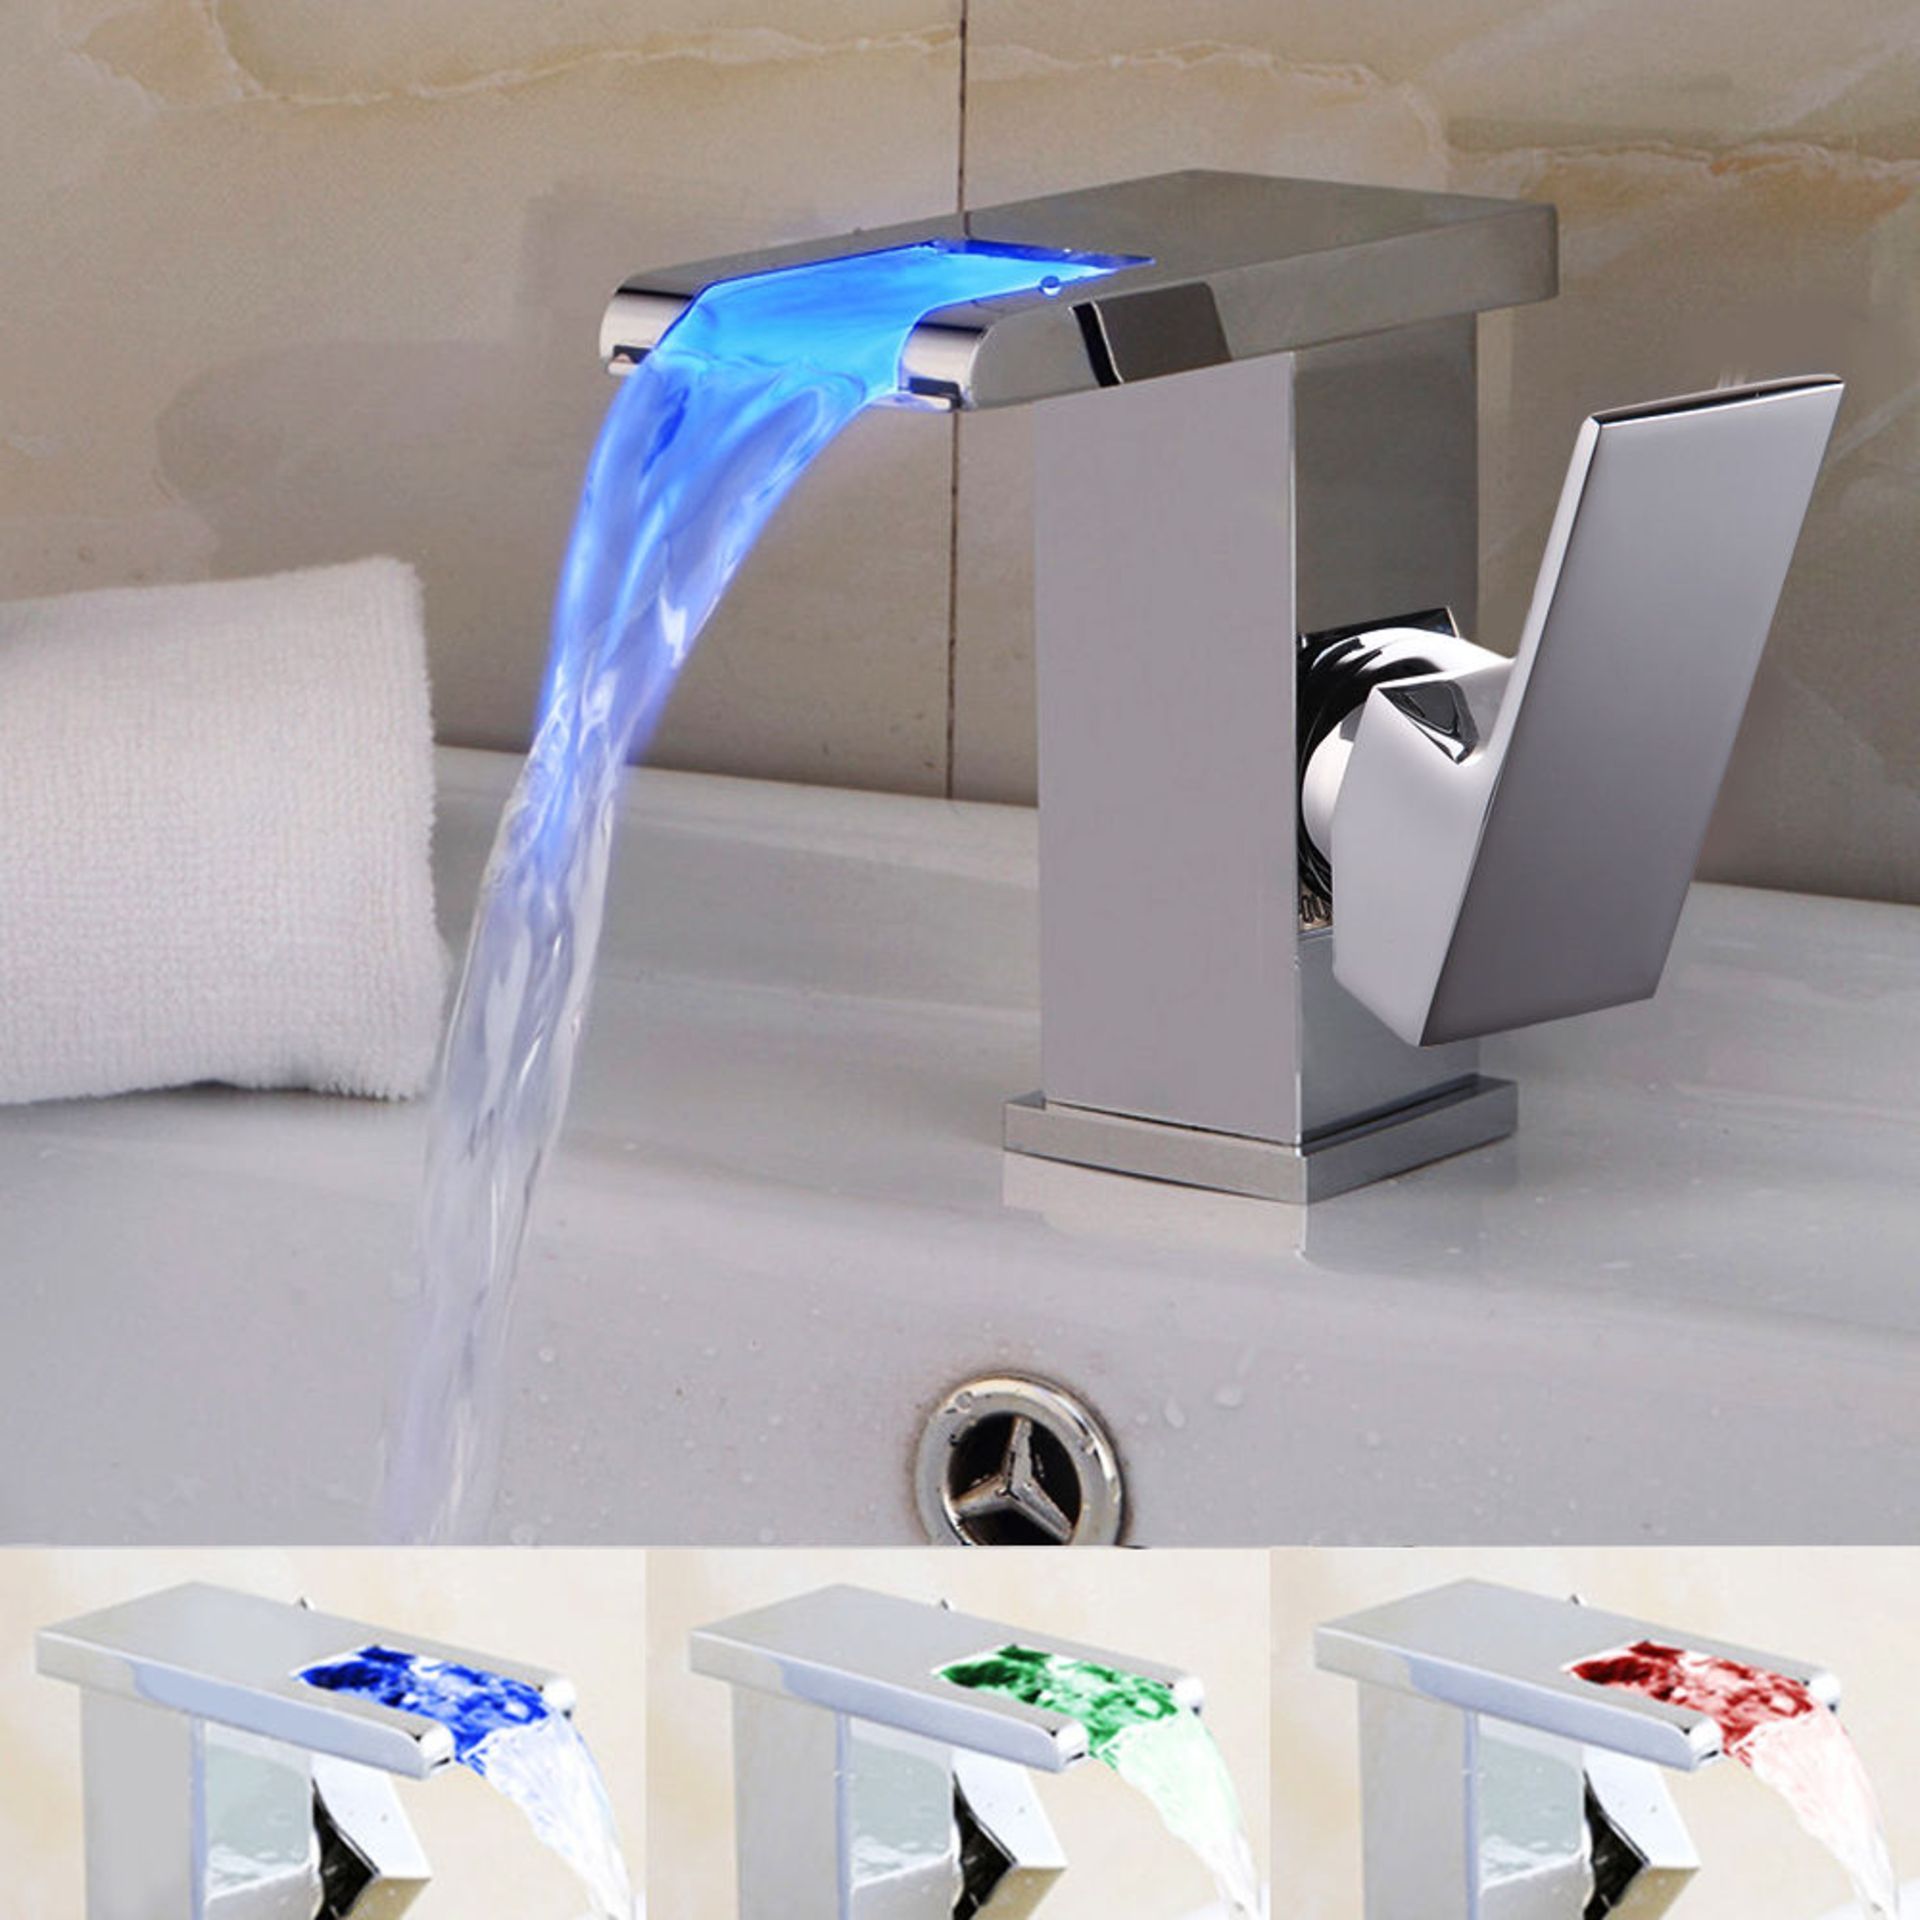 New Led Waterfall Bathroom Basin Mixer Tap. Rrp £229.99.Easy To Install And Clean. All Copper...